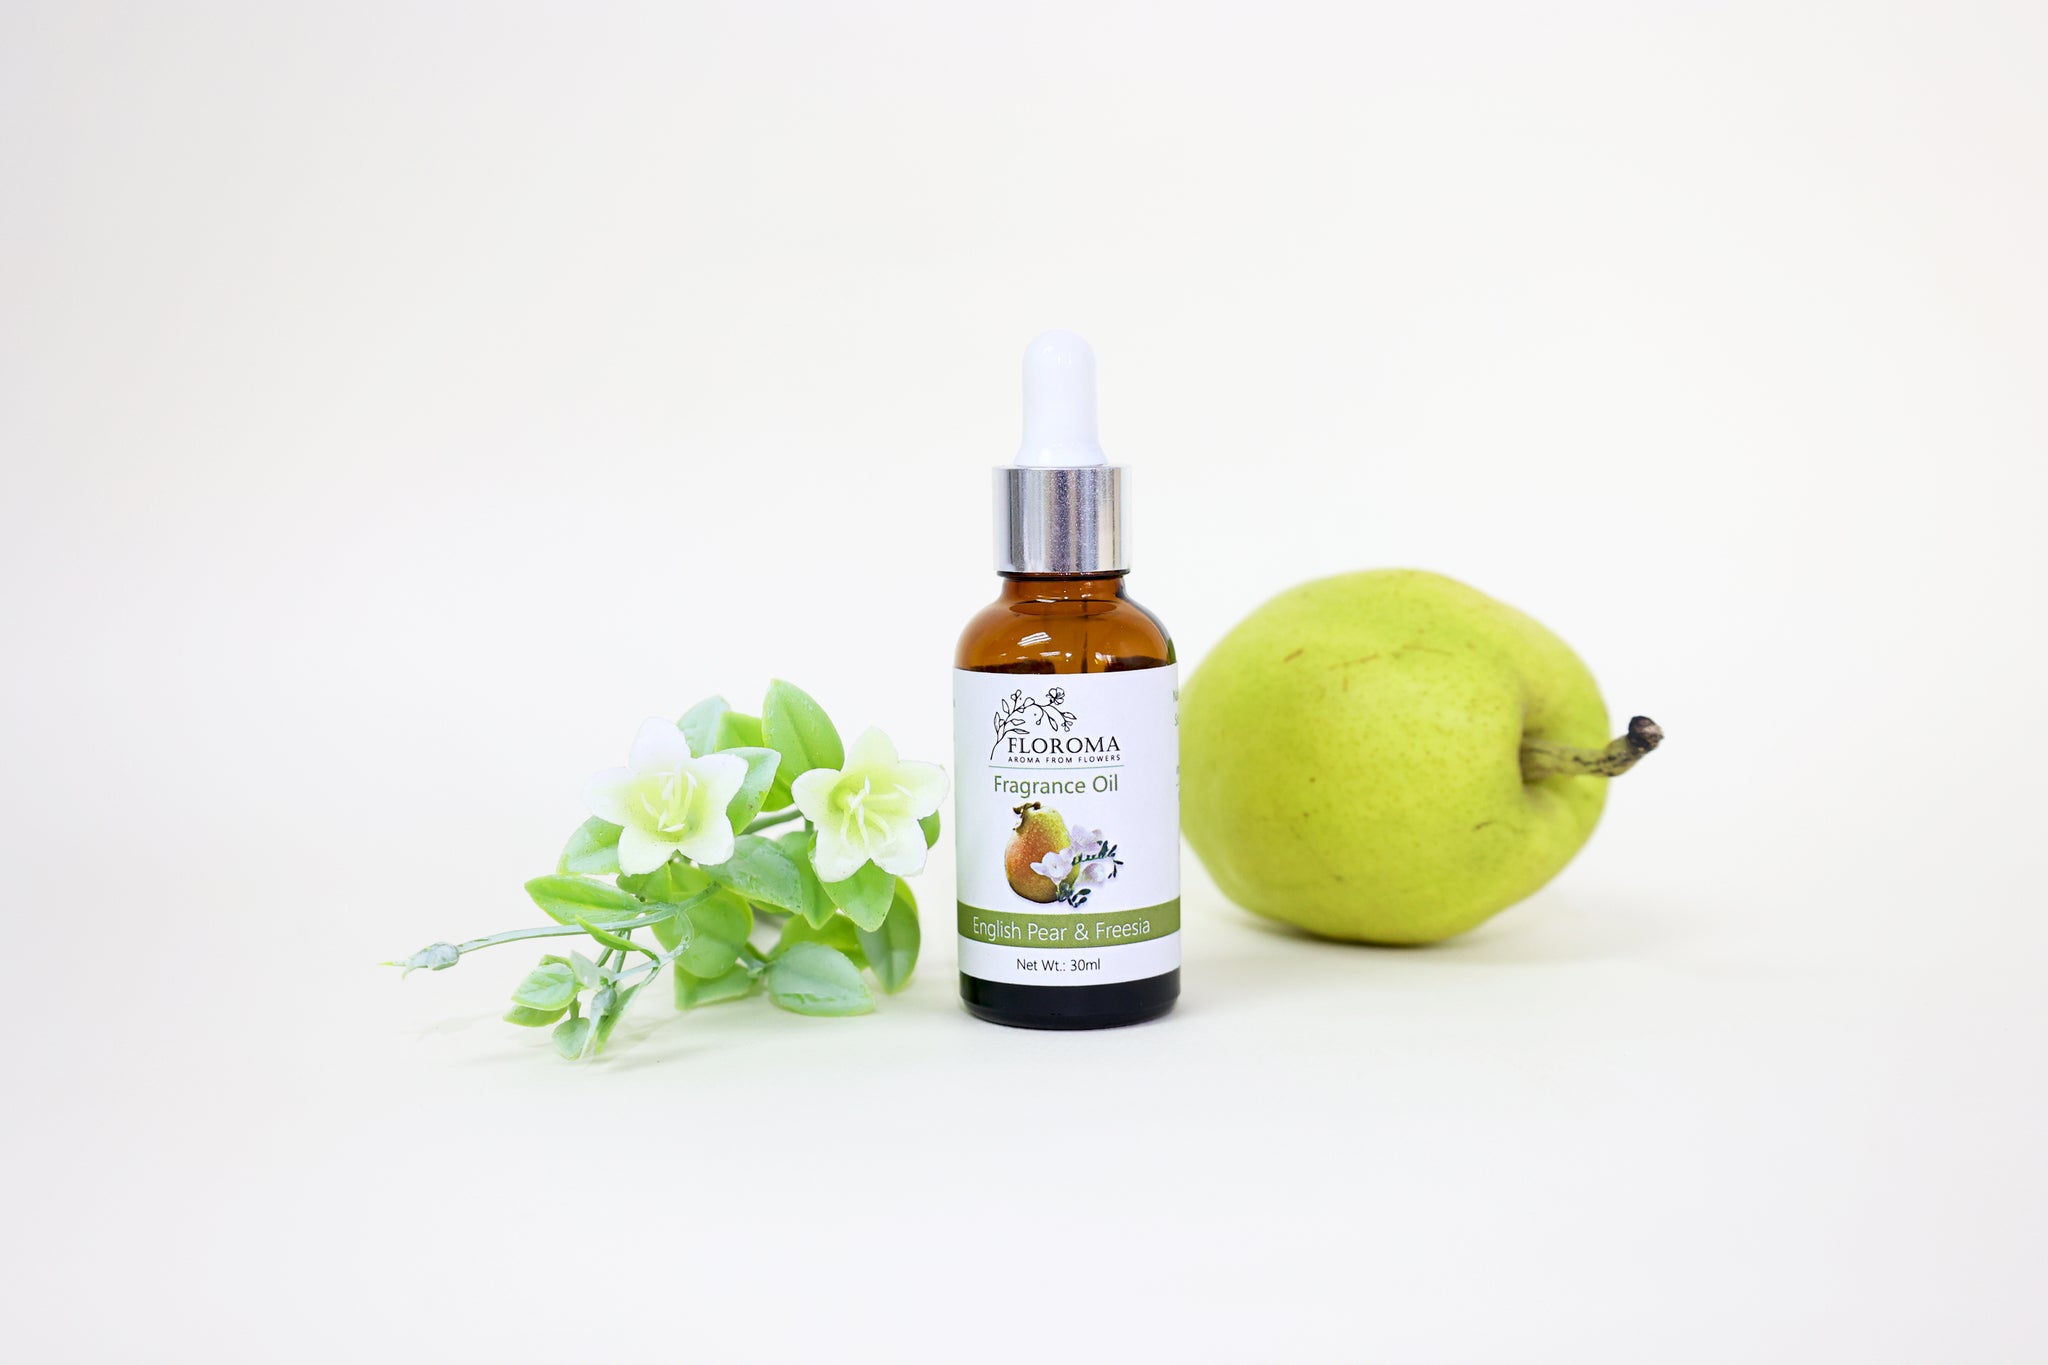 English Pears and Freesia Aromatherapy Essential Oil 15 ml